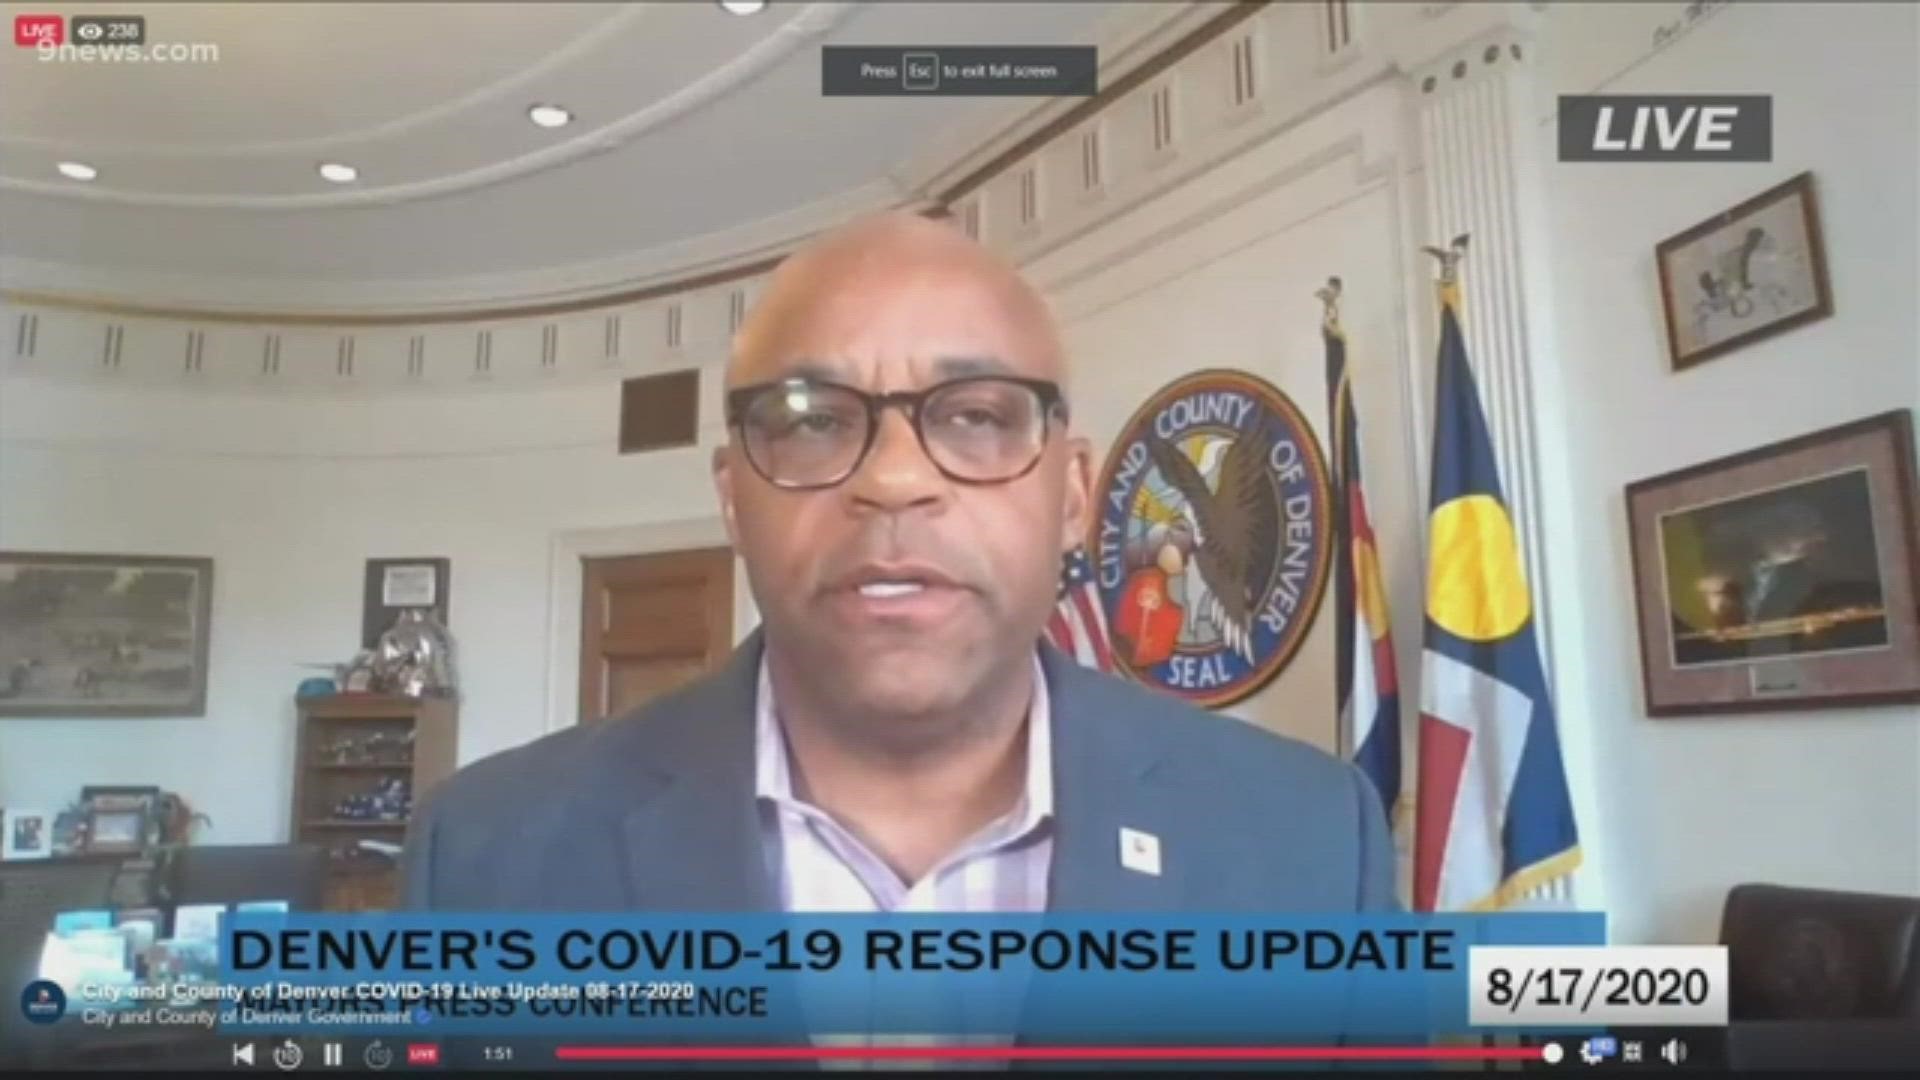 Denver Mayor Michael Hancock and city leaders provided an update on Denver’s response to COVID-19 and public safety Monday.